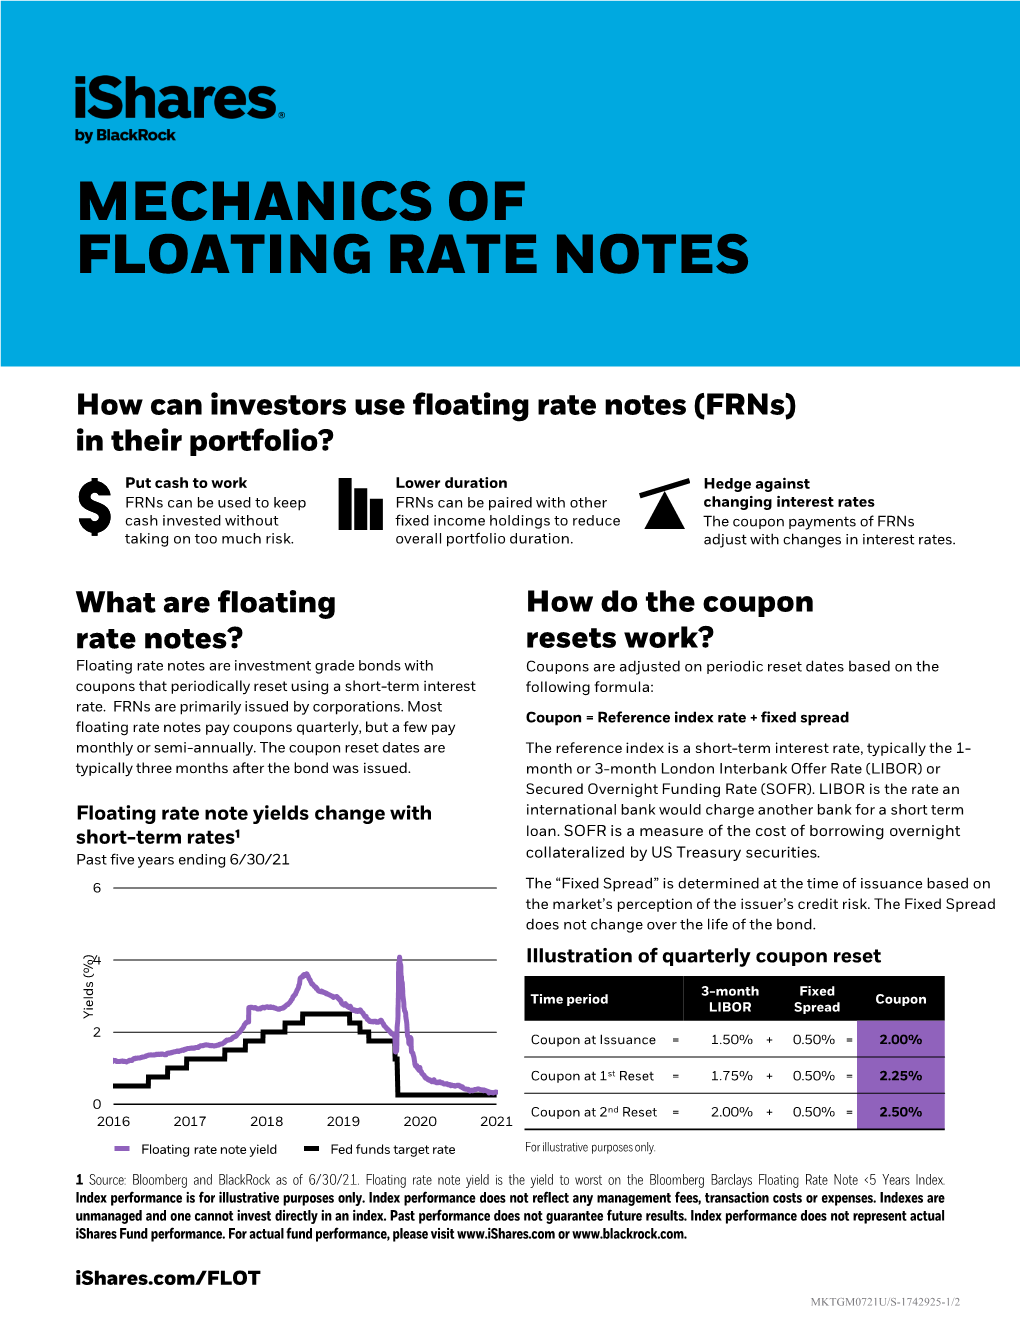 Mechanics of Floating Rate Notes